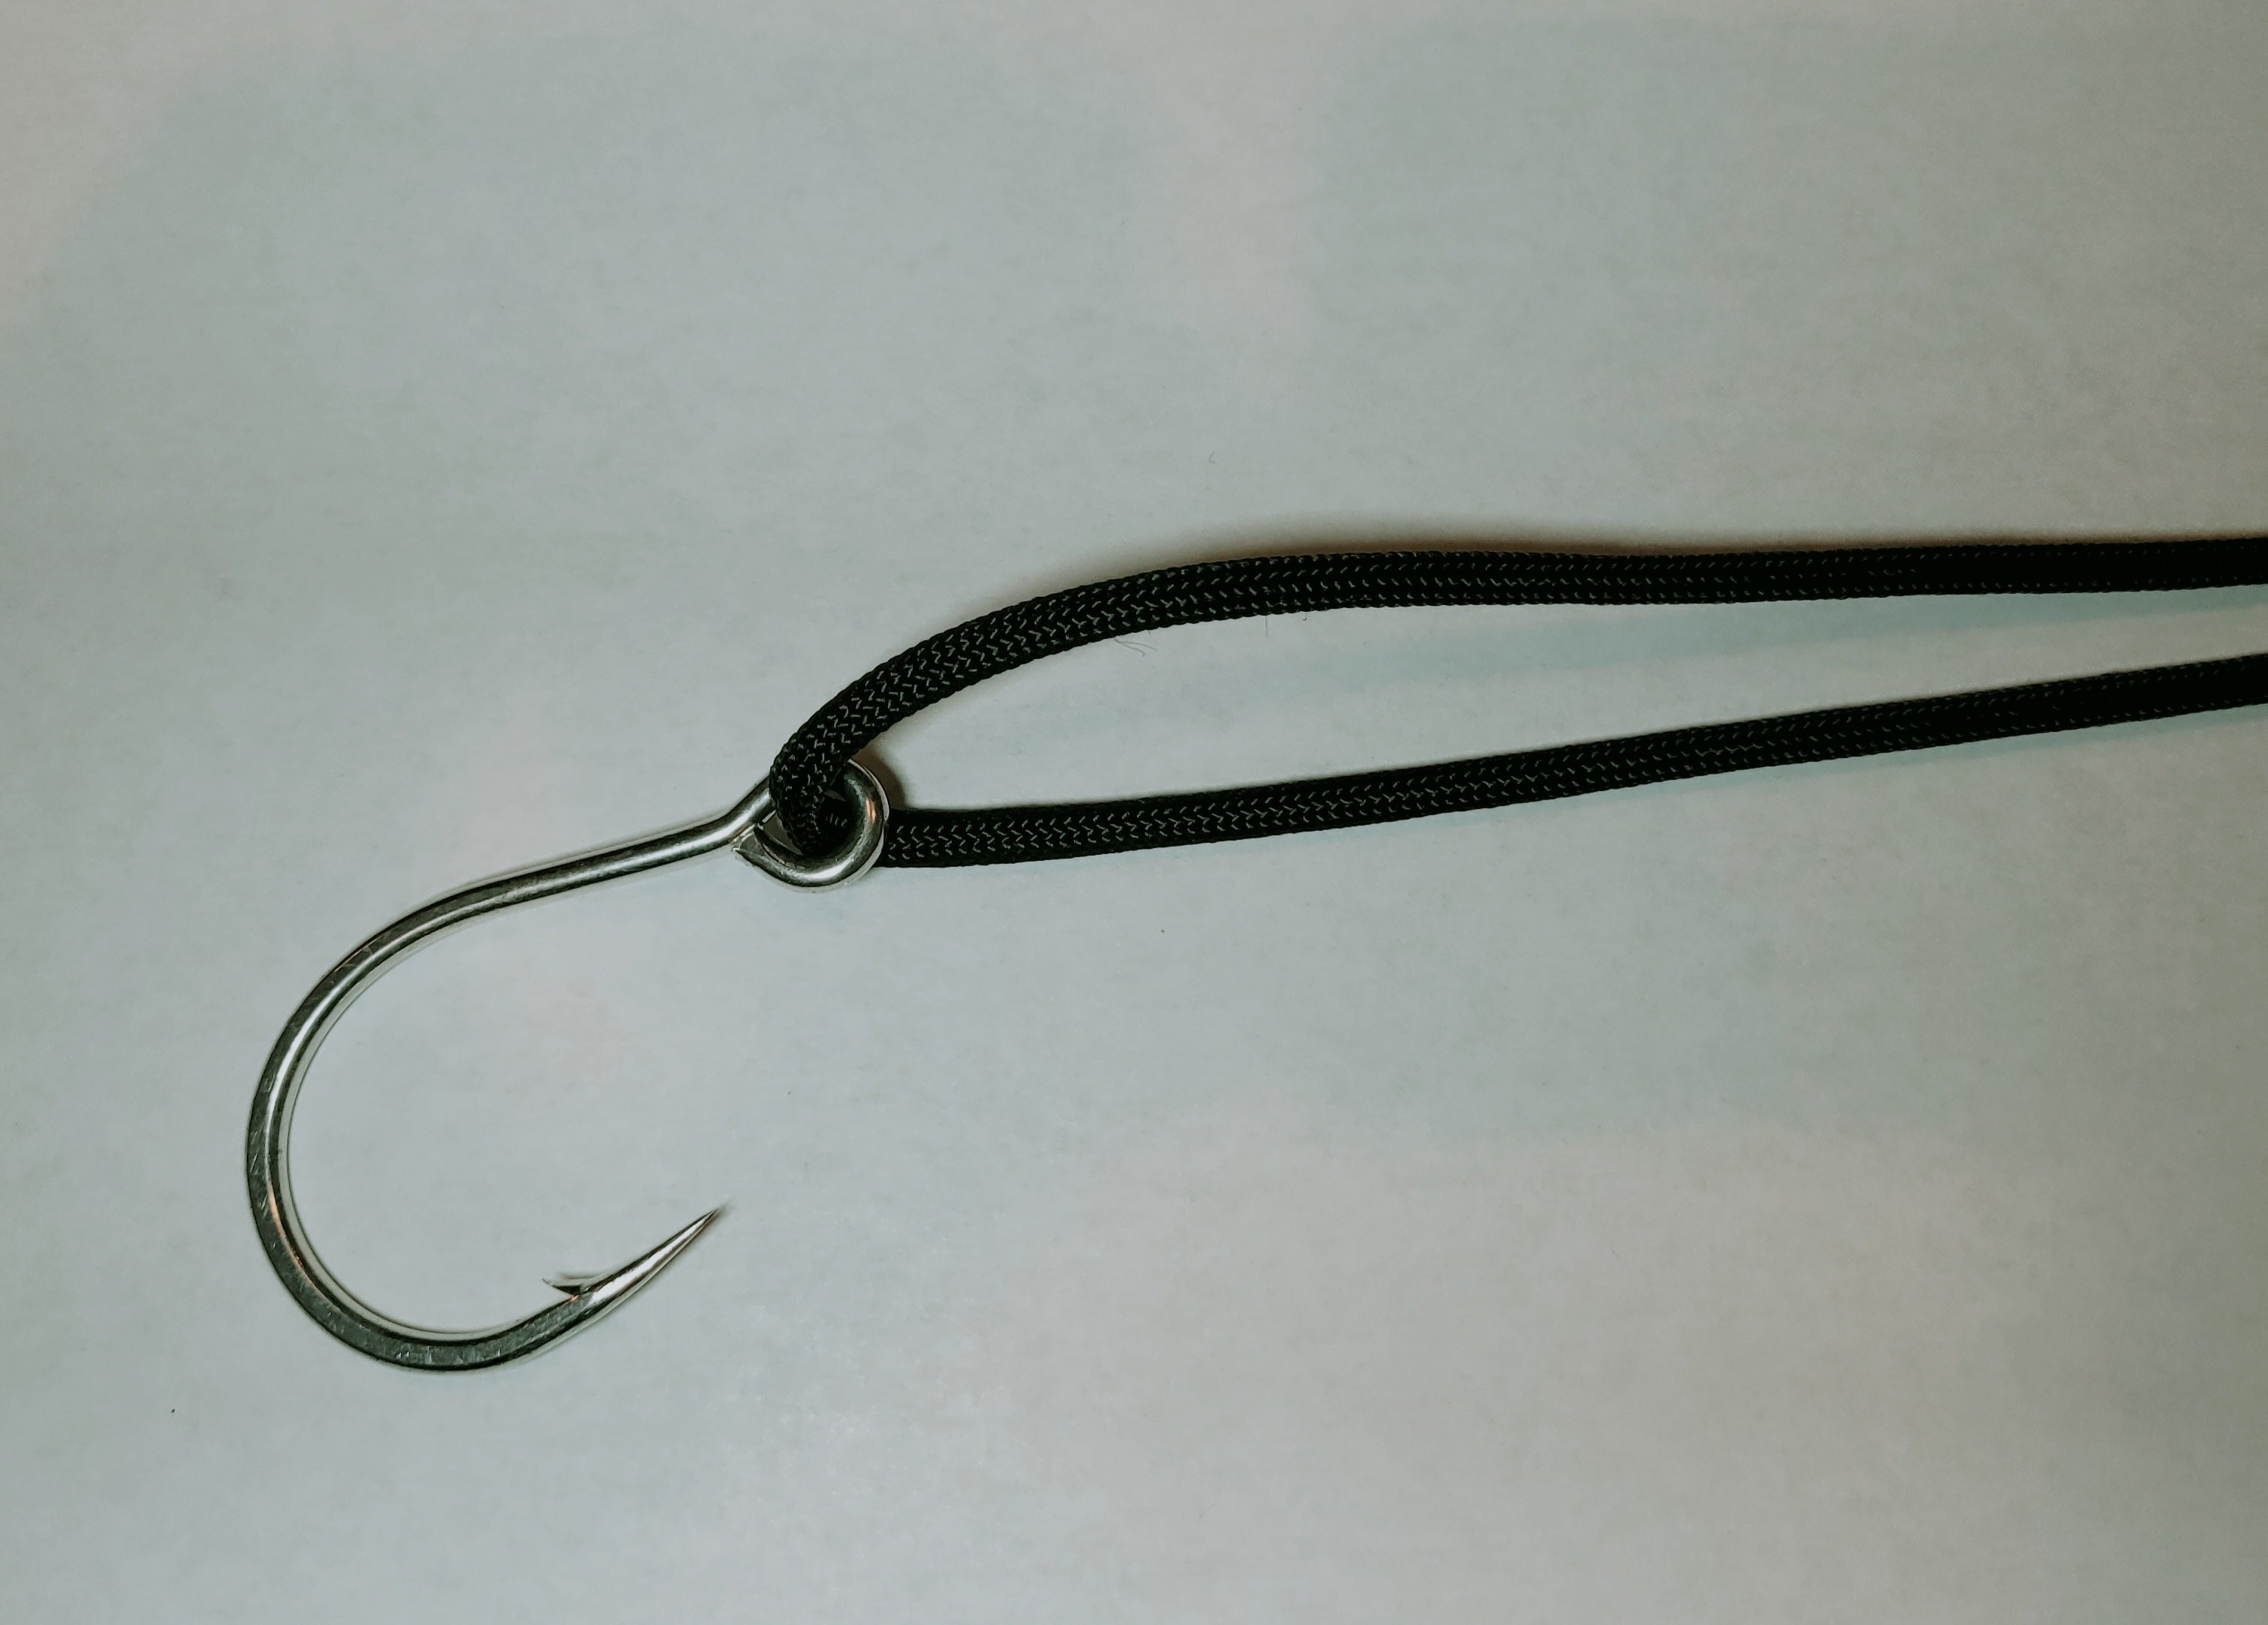 Are You Nuts? Know your Fishing Knots! – The Surgeon Loop Knot